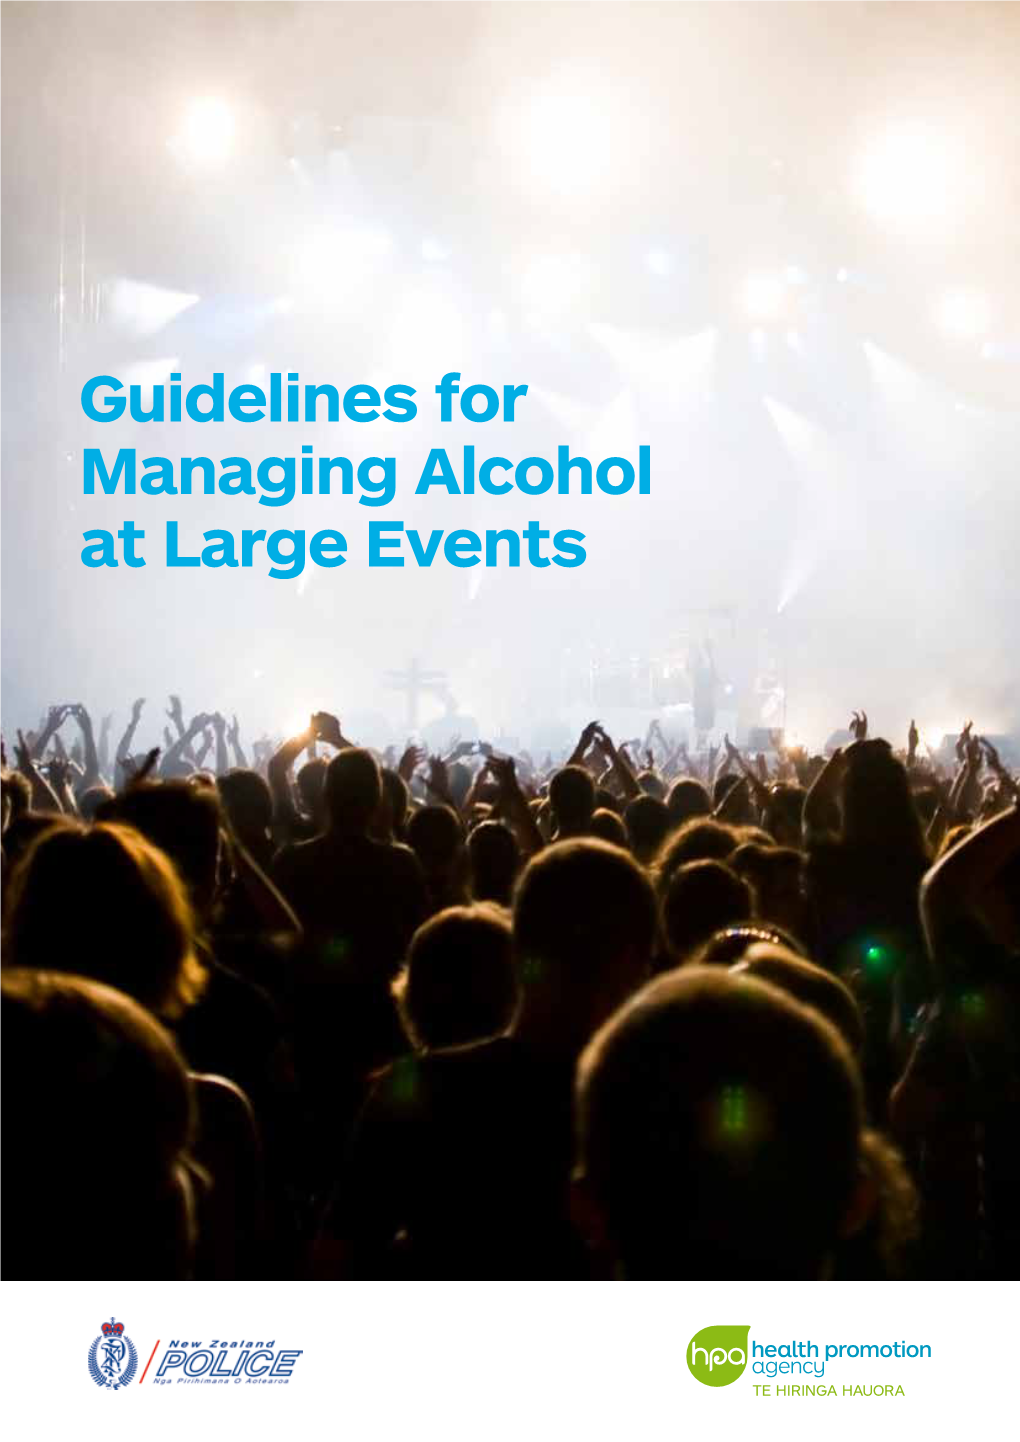 Guidelines for Managing Alcohol at Large Events